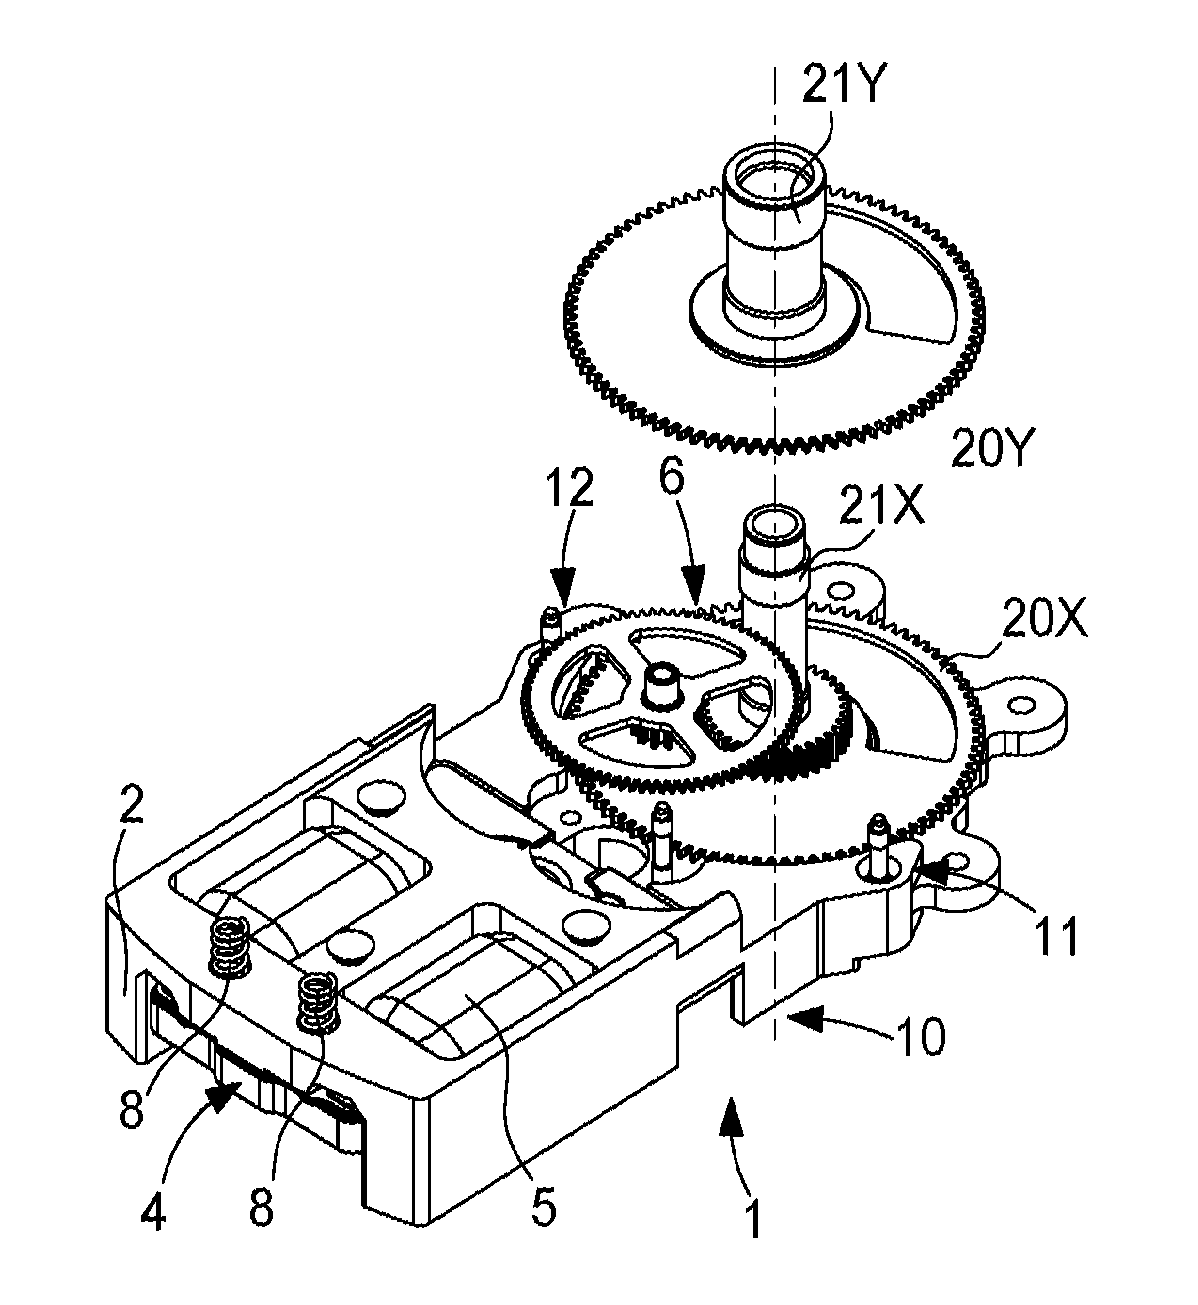 Motor module for watches